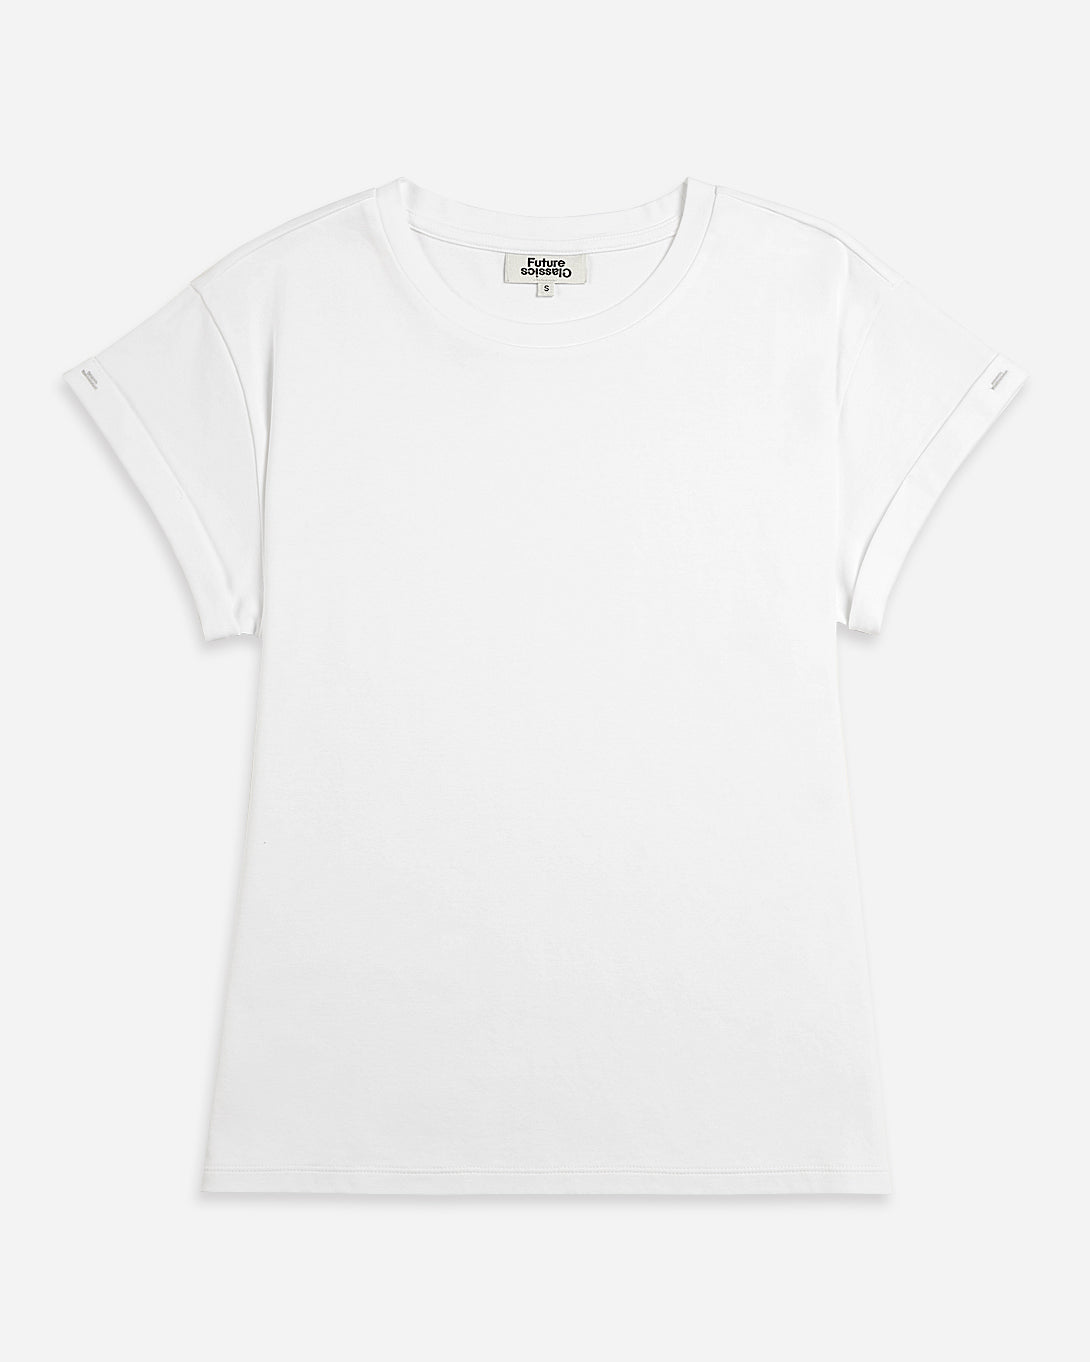 Pure White Rolled Sleeve Tee Womens Casual Summer Tee